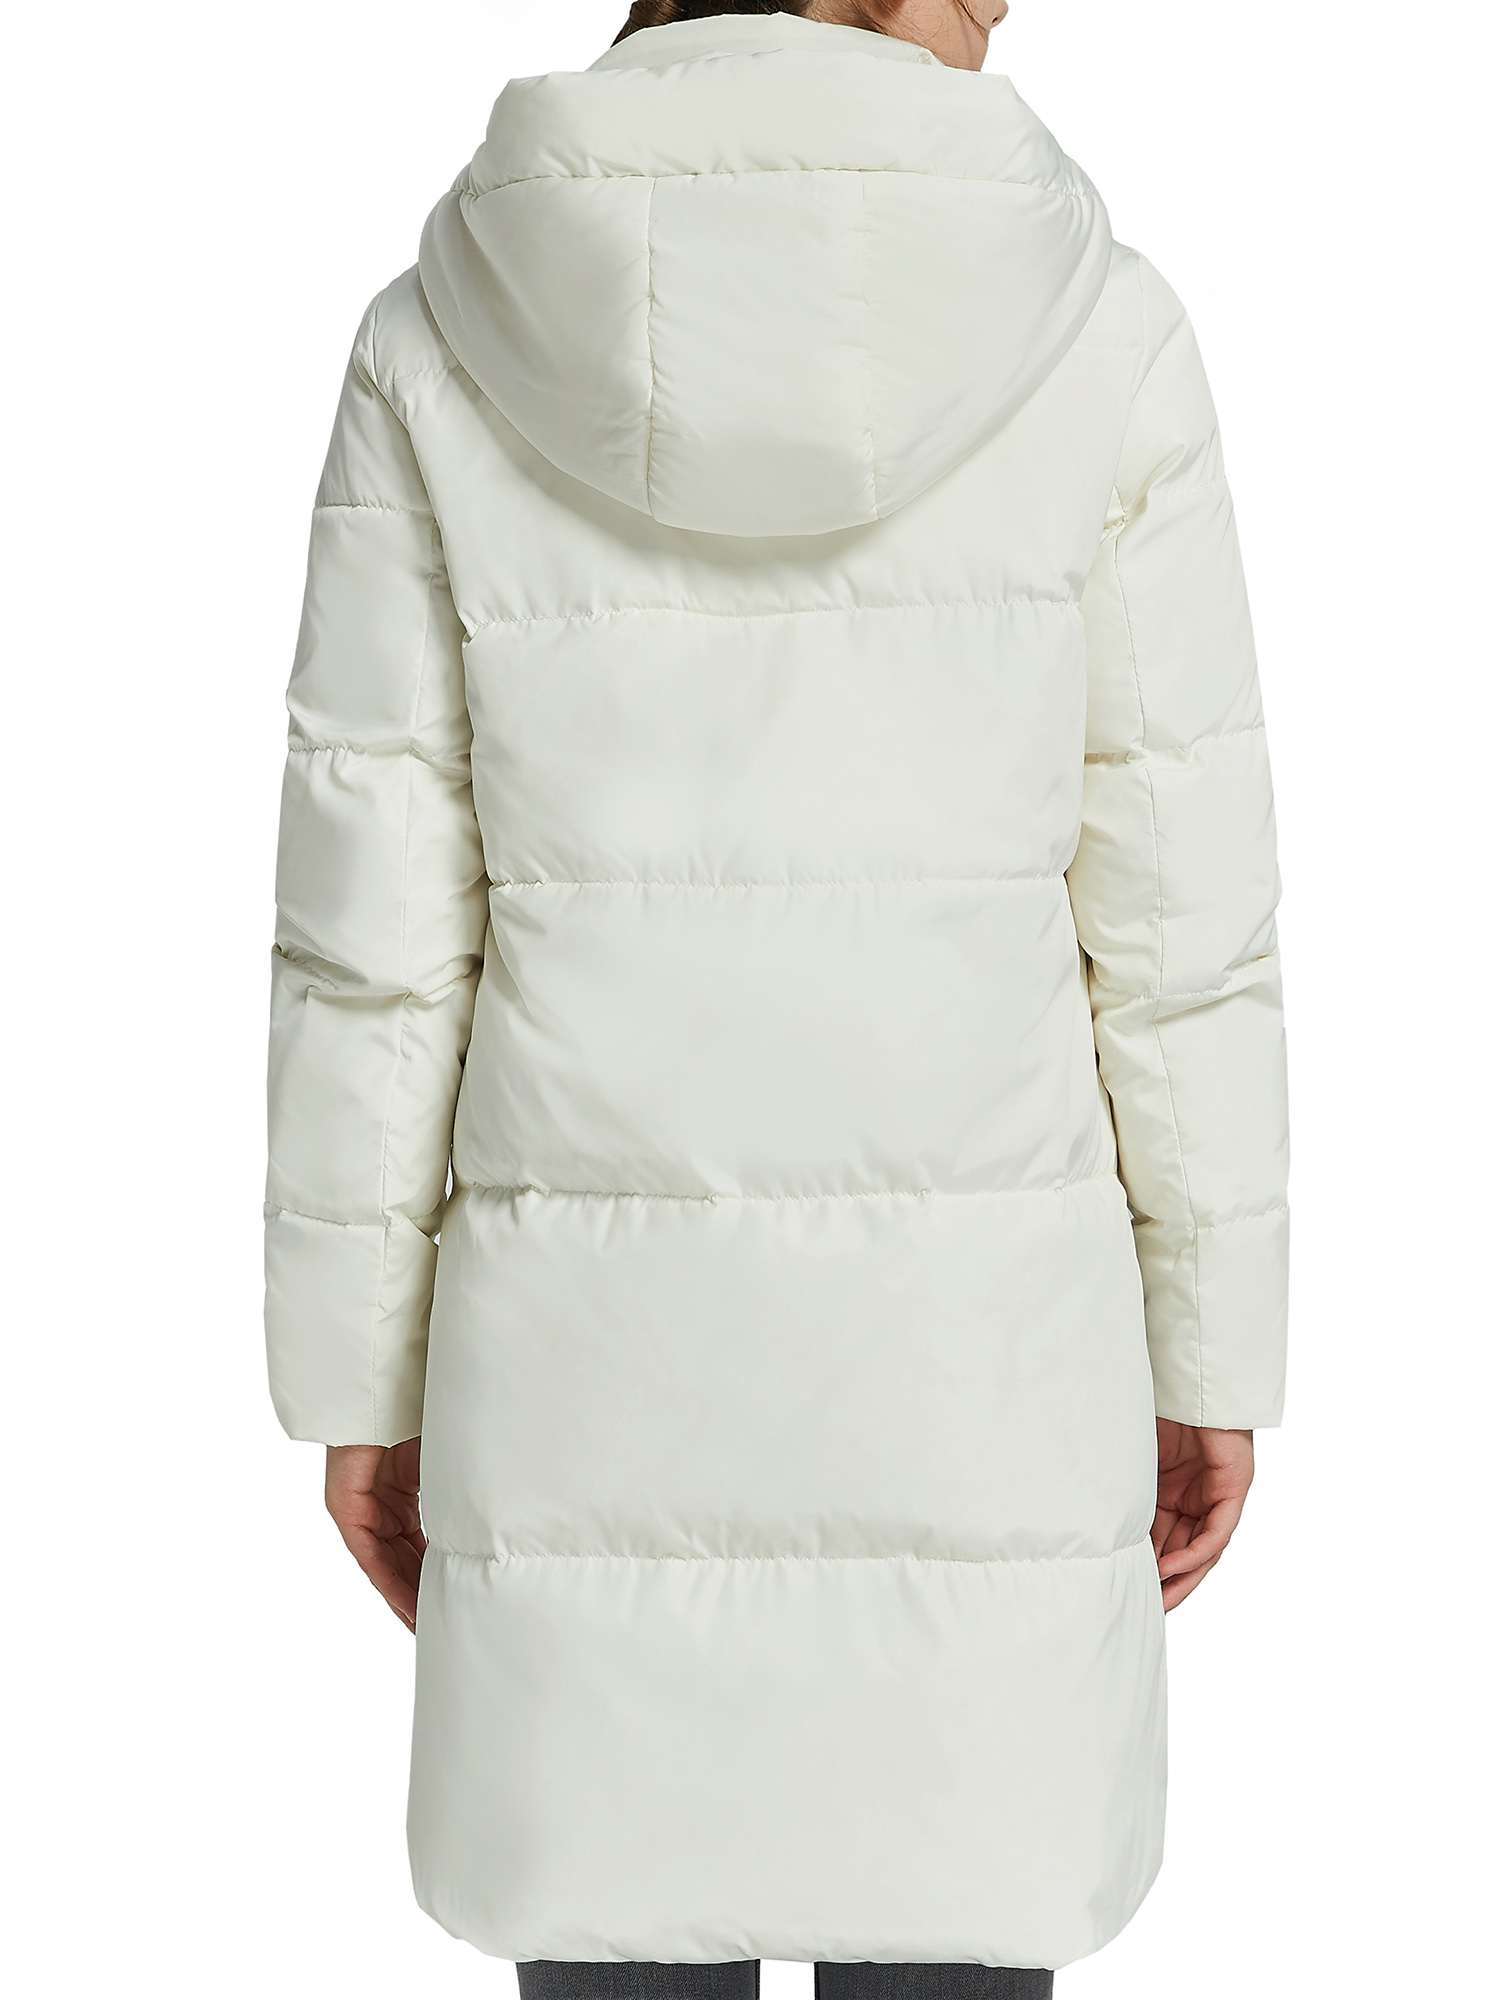 Orolay Women's Quilted Down Jacket Winter Down Coat Parka Coat with Hood Mid Lrngth Down Parka White XS - image 2 of 5